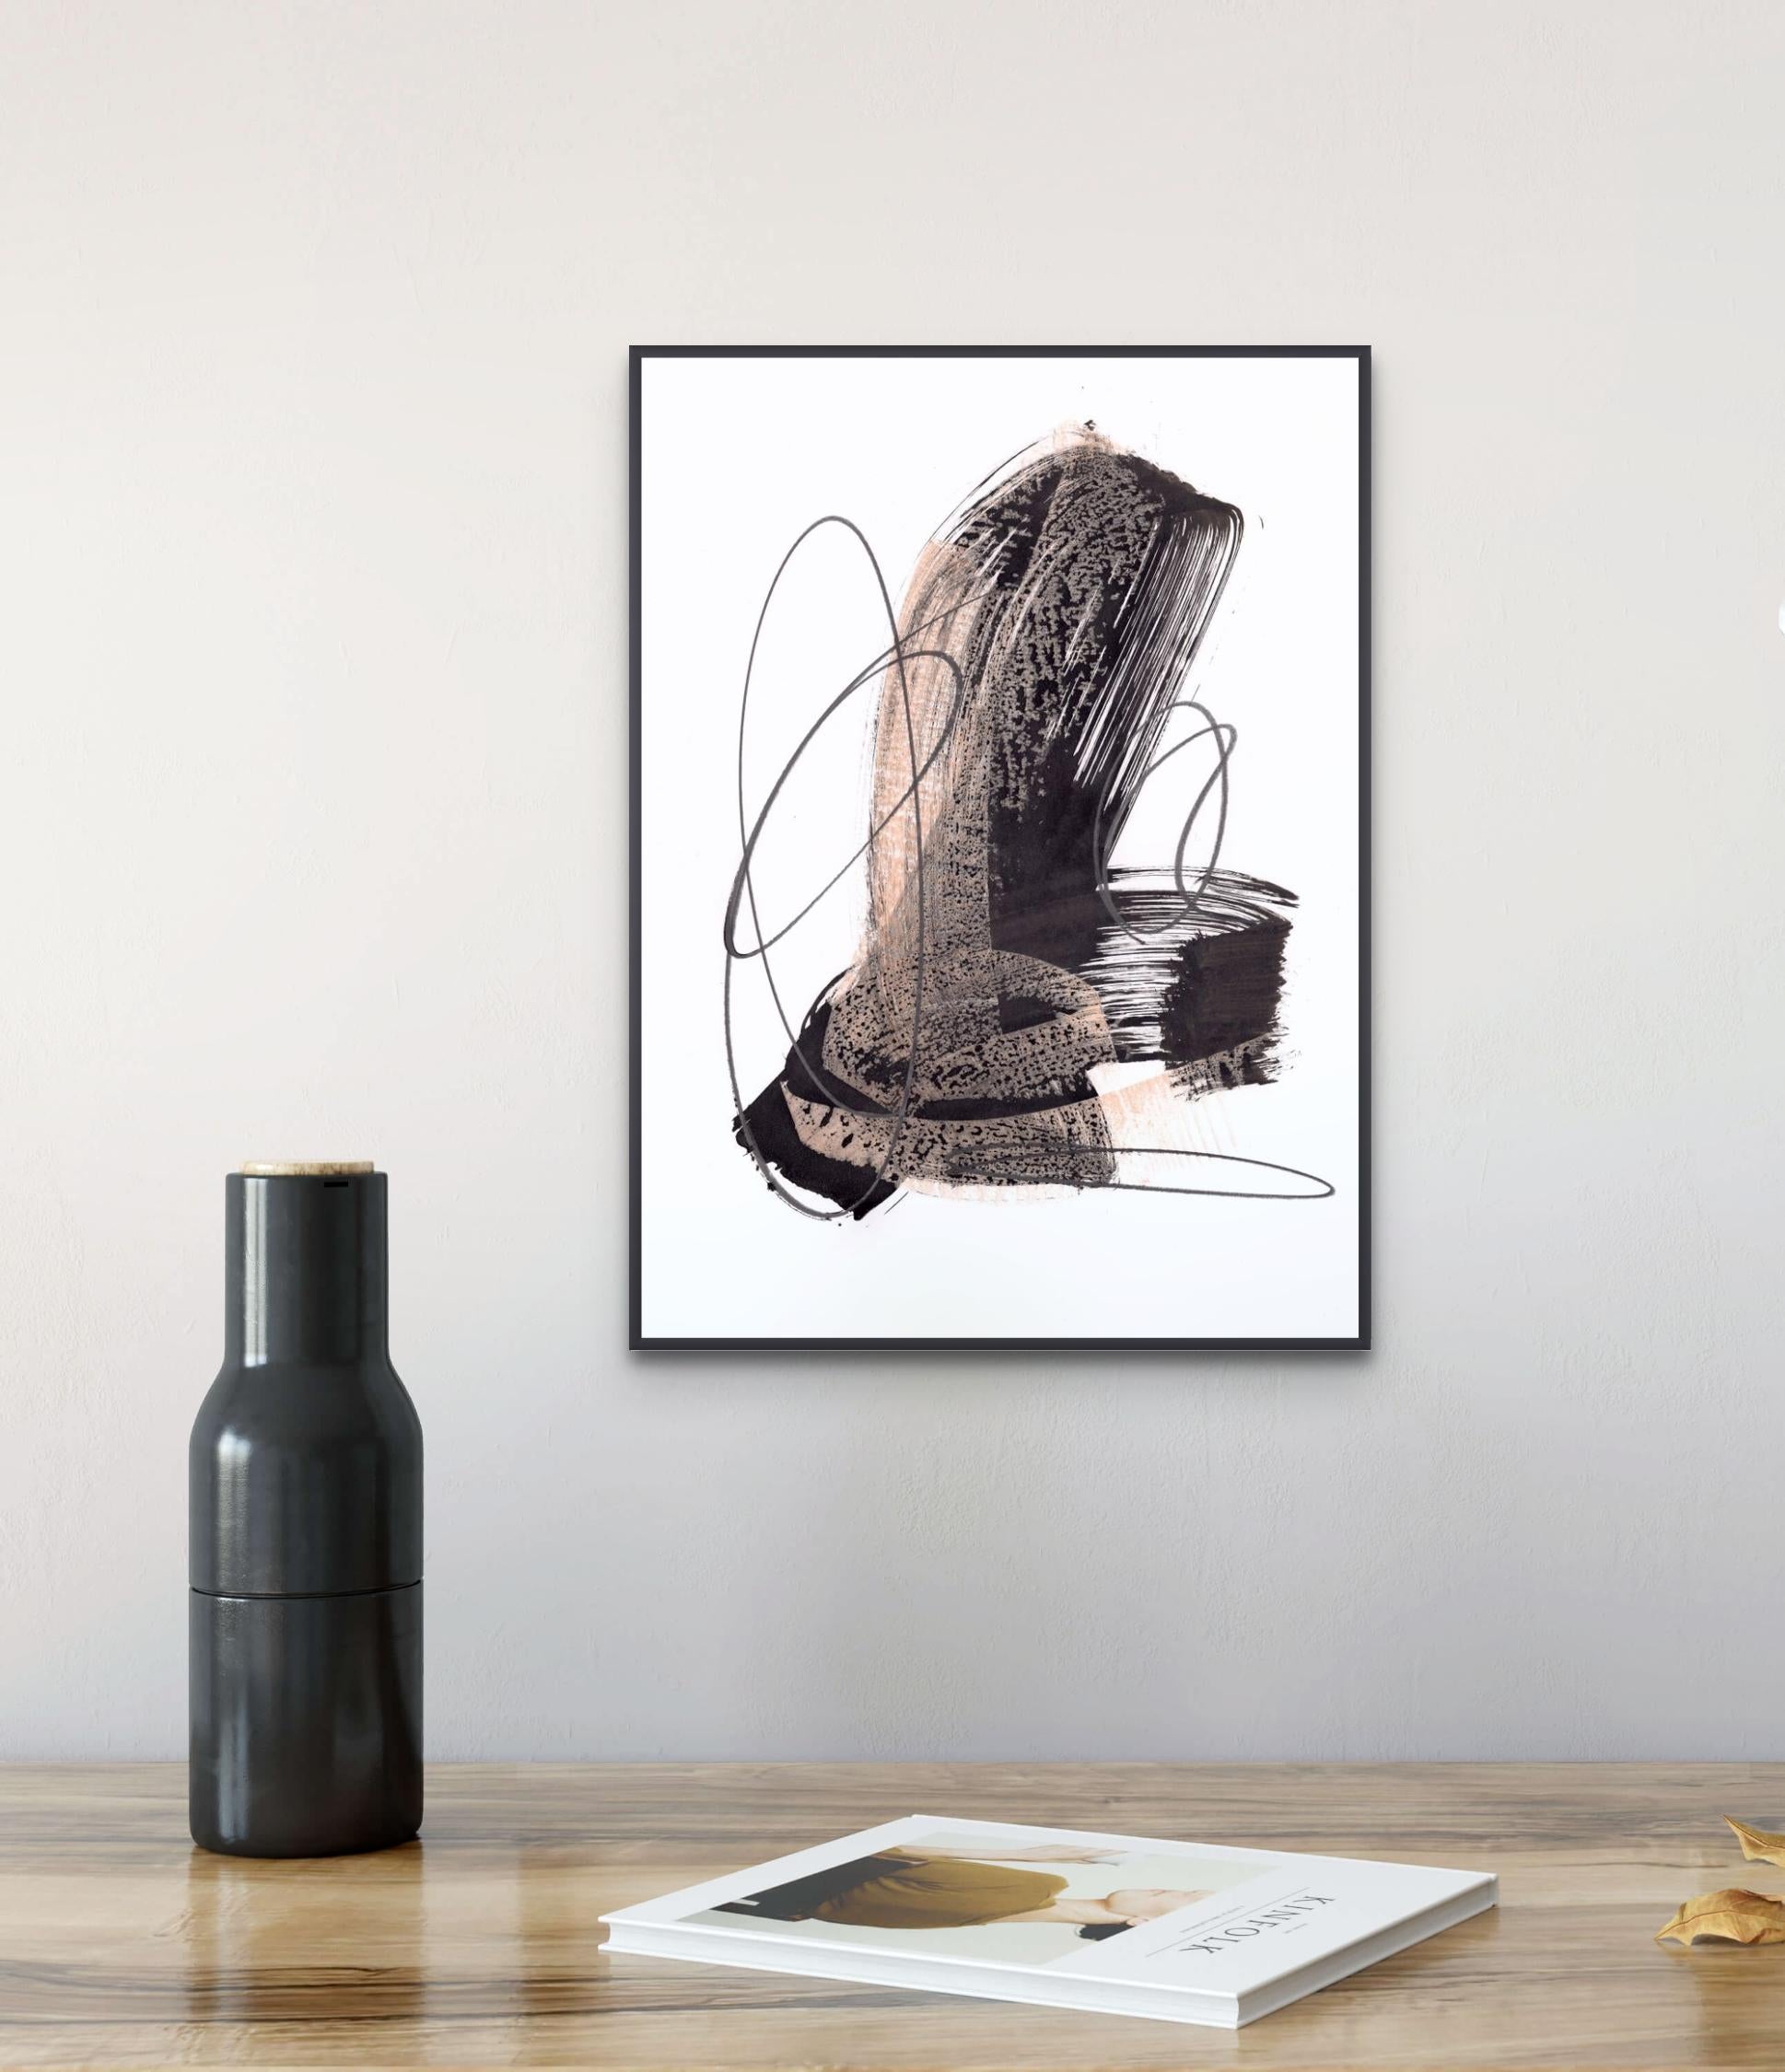 This expressive monochrome drawing is made with Chinese ink and pastel on heavy white paper. Looking at it you can feel the freshness of instant impulse and the charge of energy!  

Every time I draw such abstract lines, a flow of energy moves my